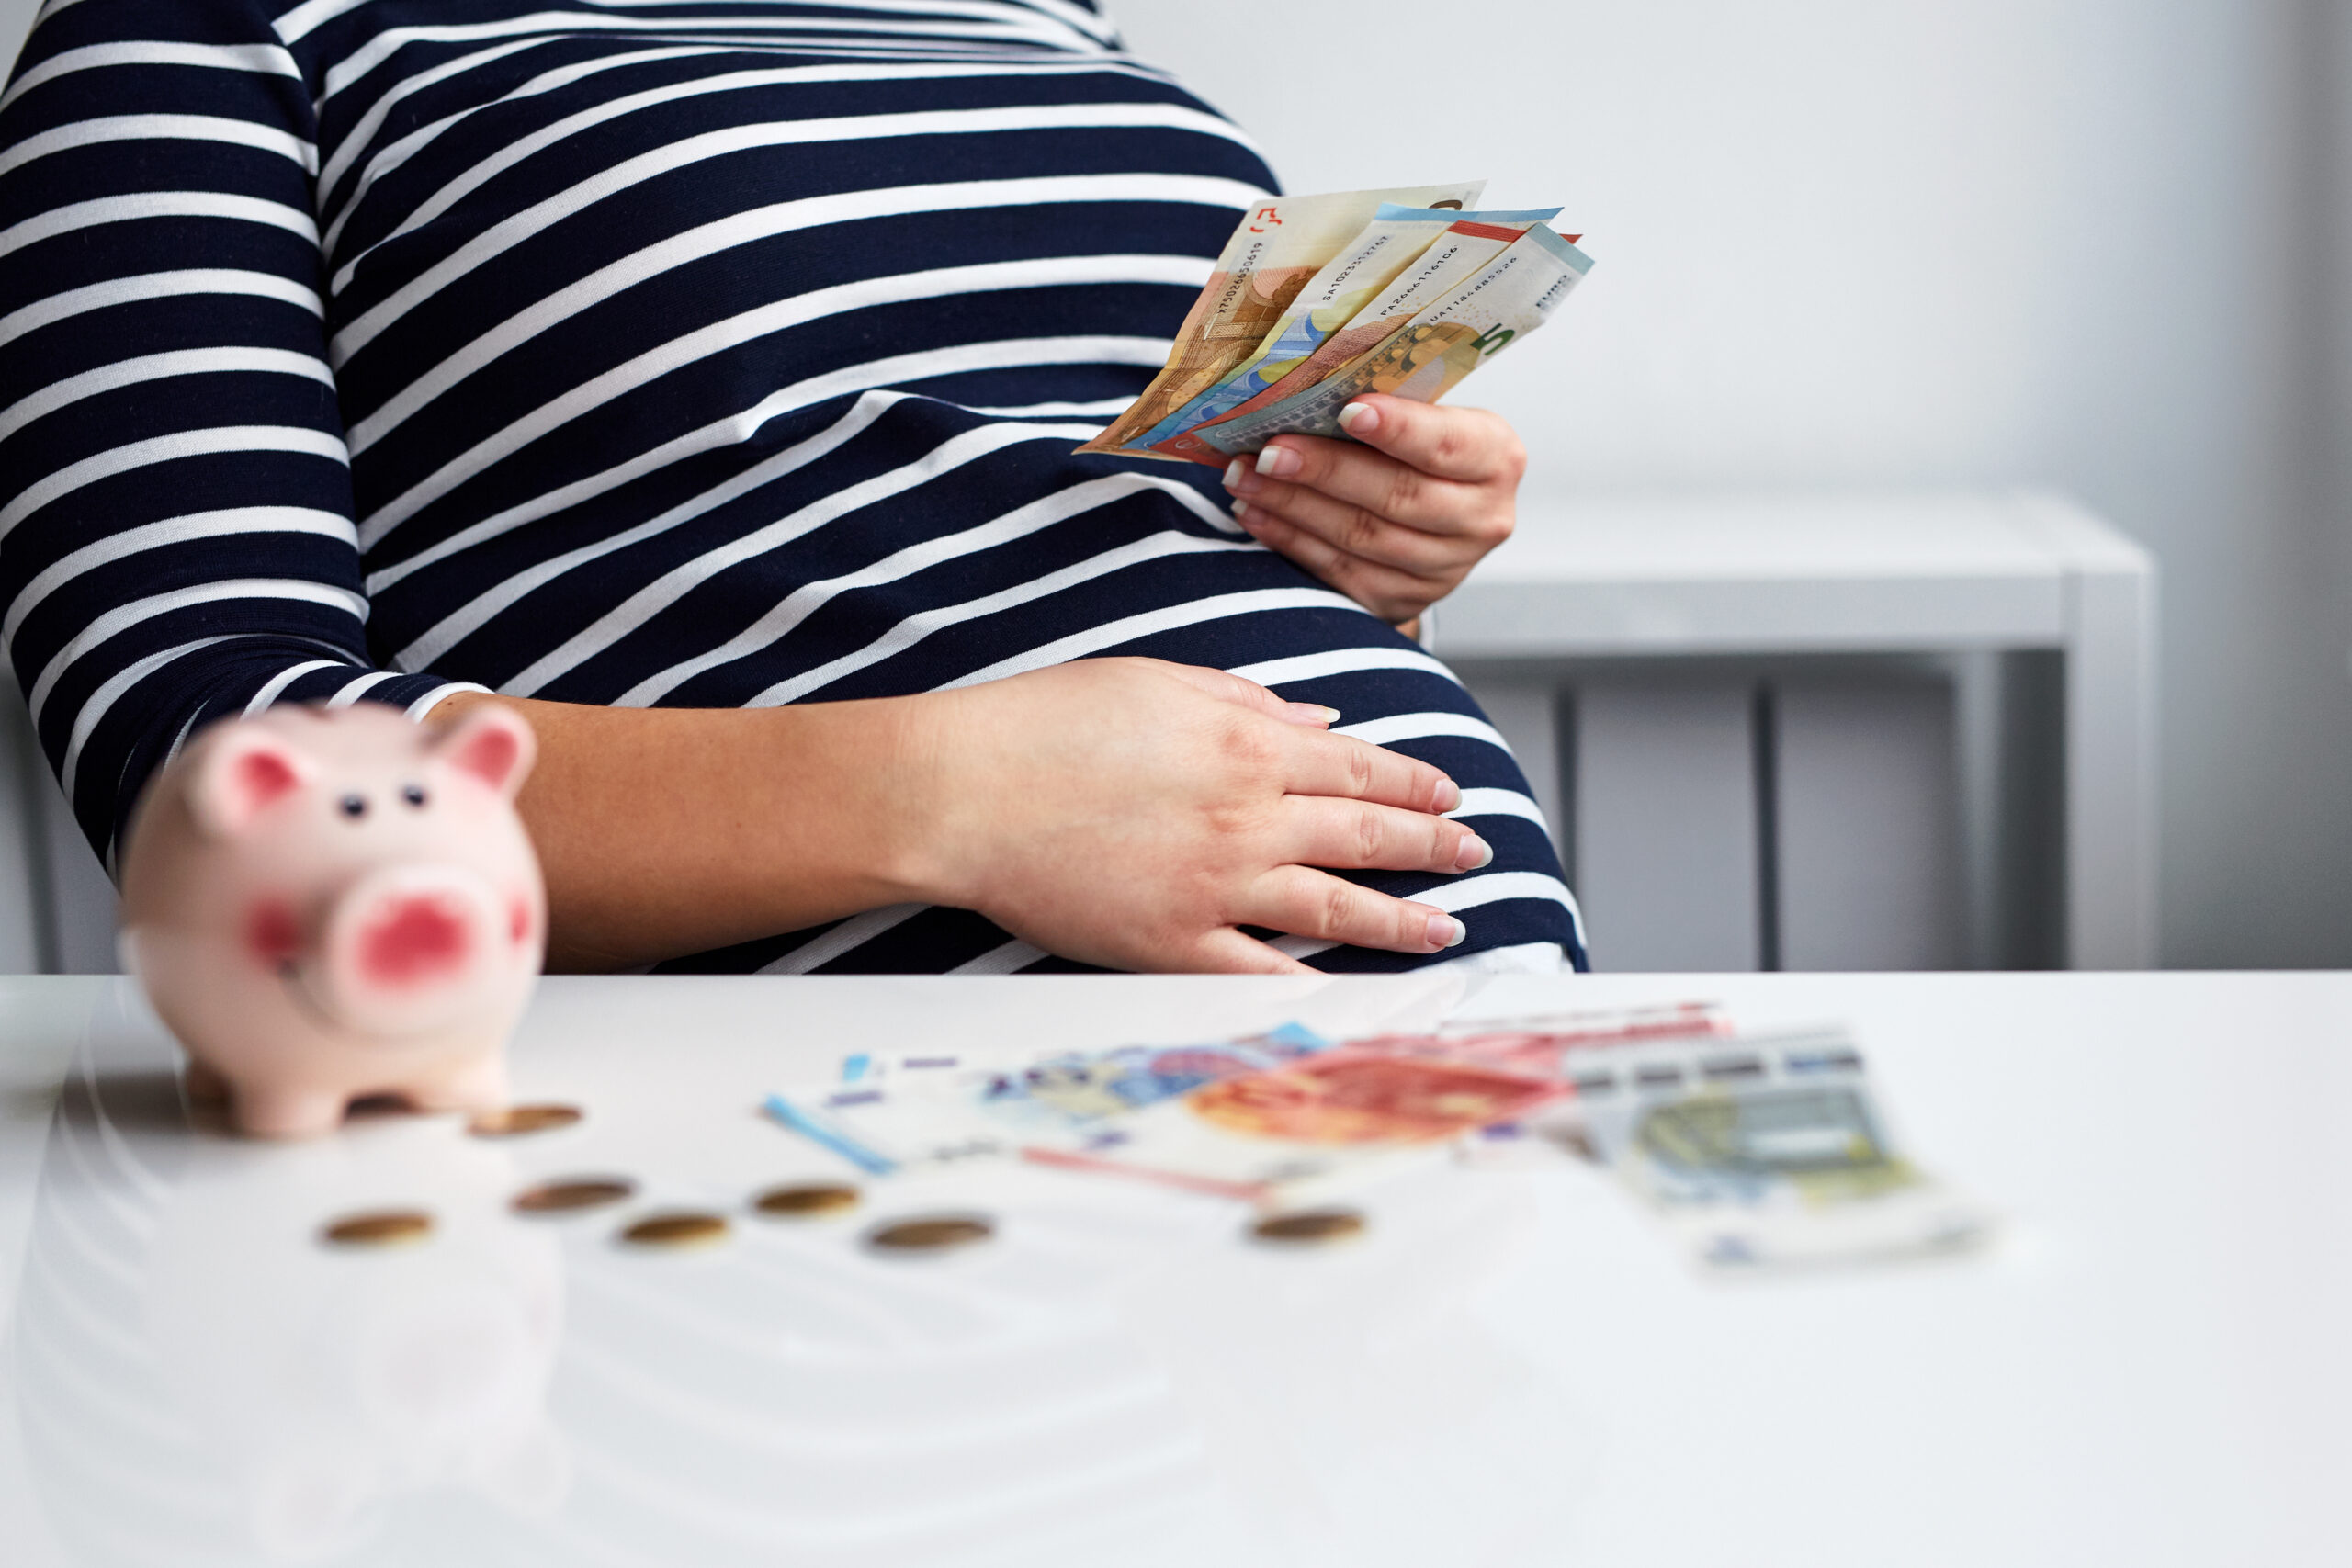 Are Surrogates Required To Pay Taxes On Their Earnings?